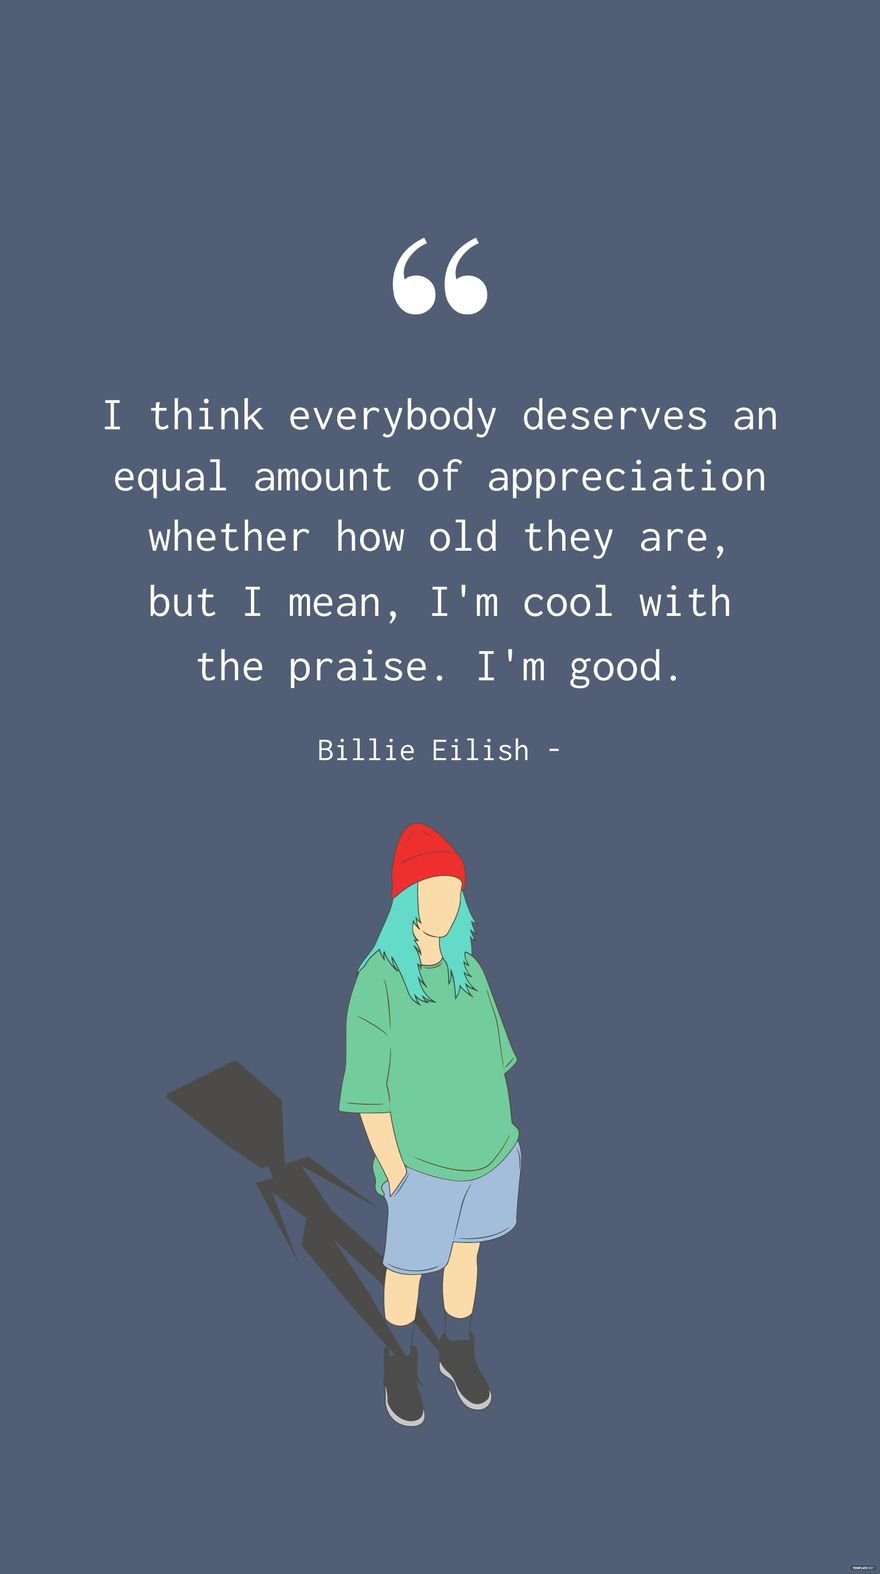 Billie Eilish - I think everybody deserves an equal amount of appreciation whether how old they are, but I mean, I'm cool with the praise. I'm good.